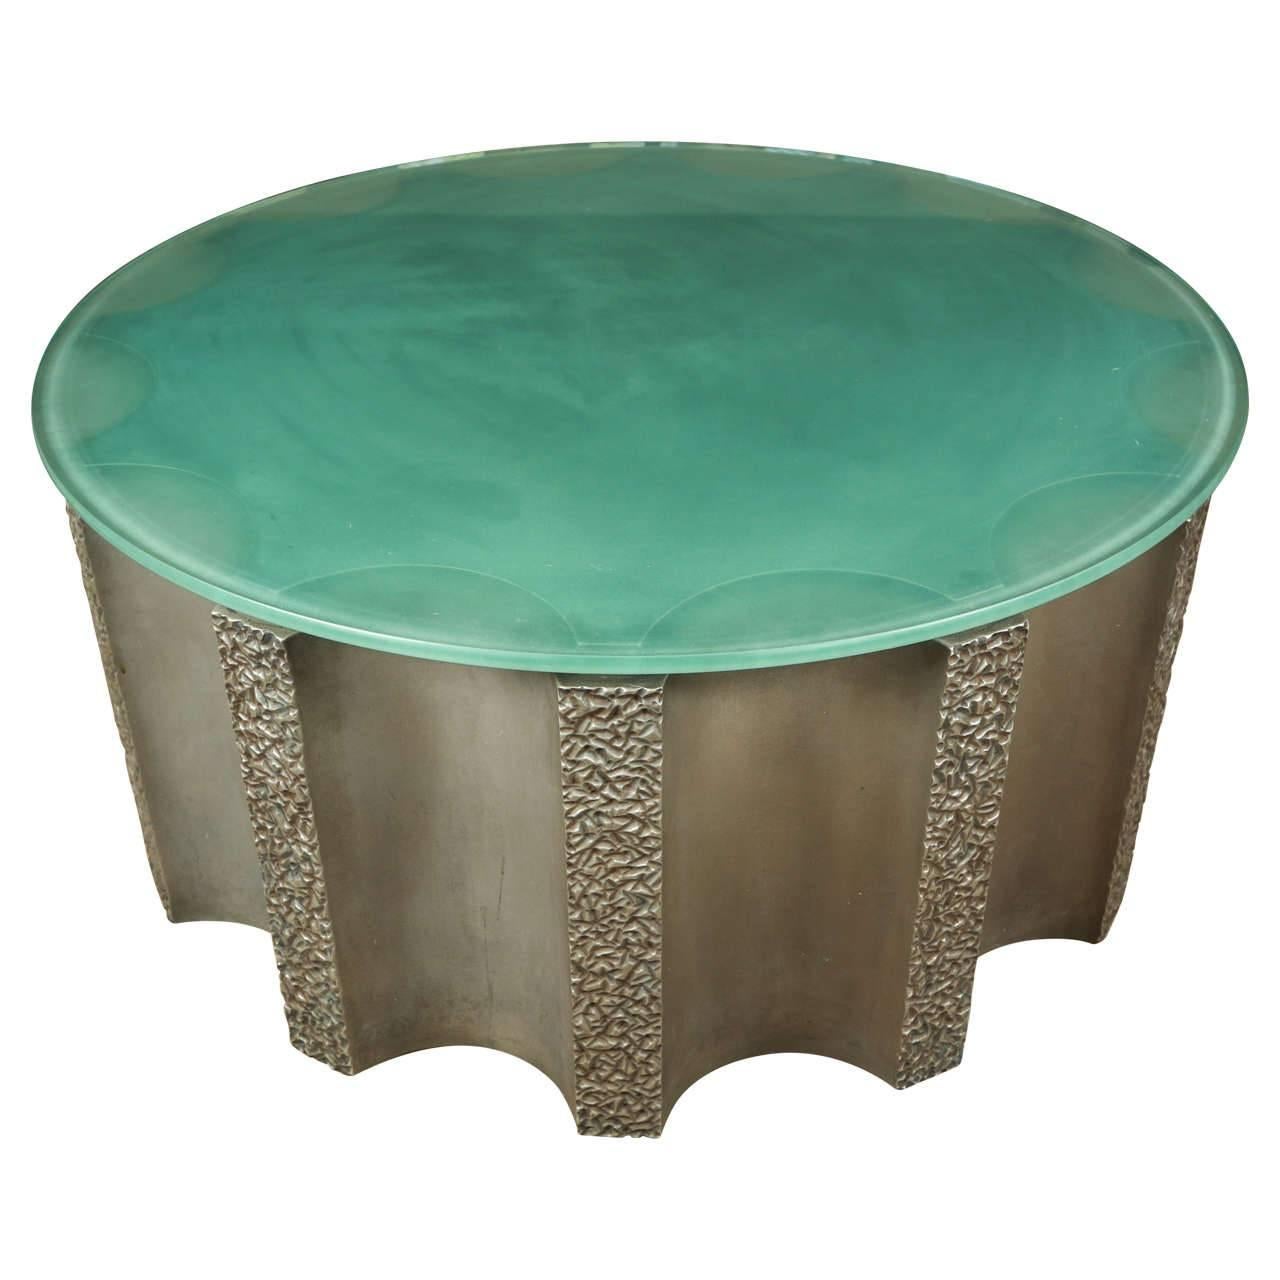 Impressive Drum-Shaped Fluted Coffee Table by Steve Chase For Sale